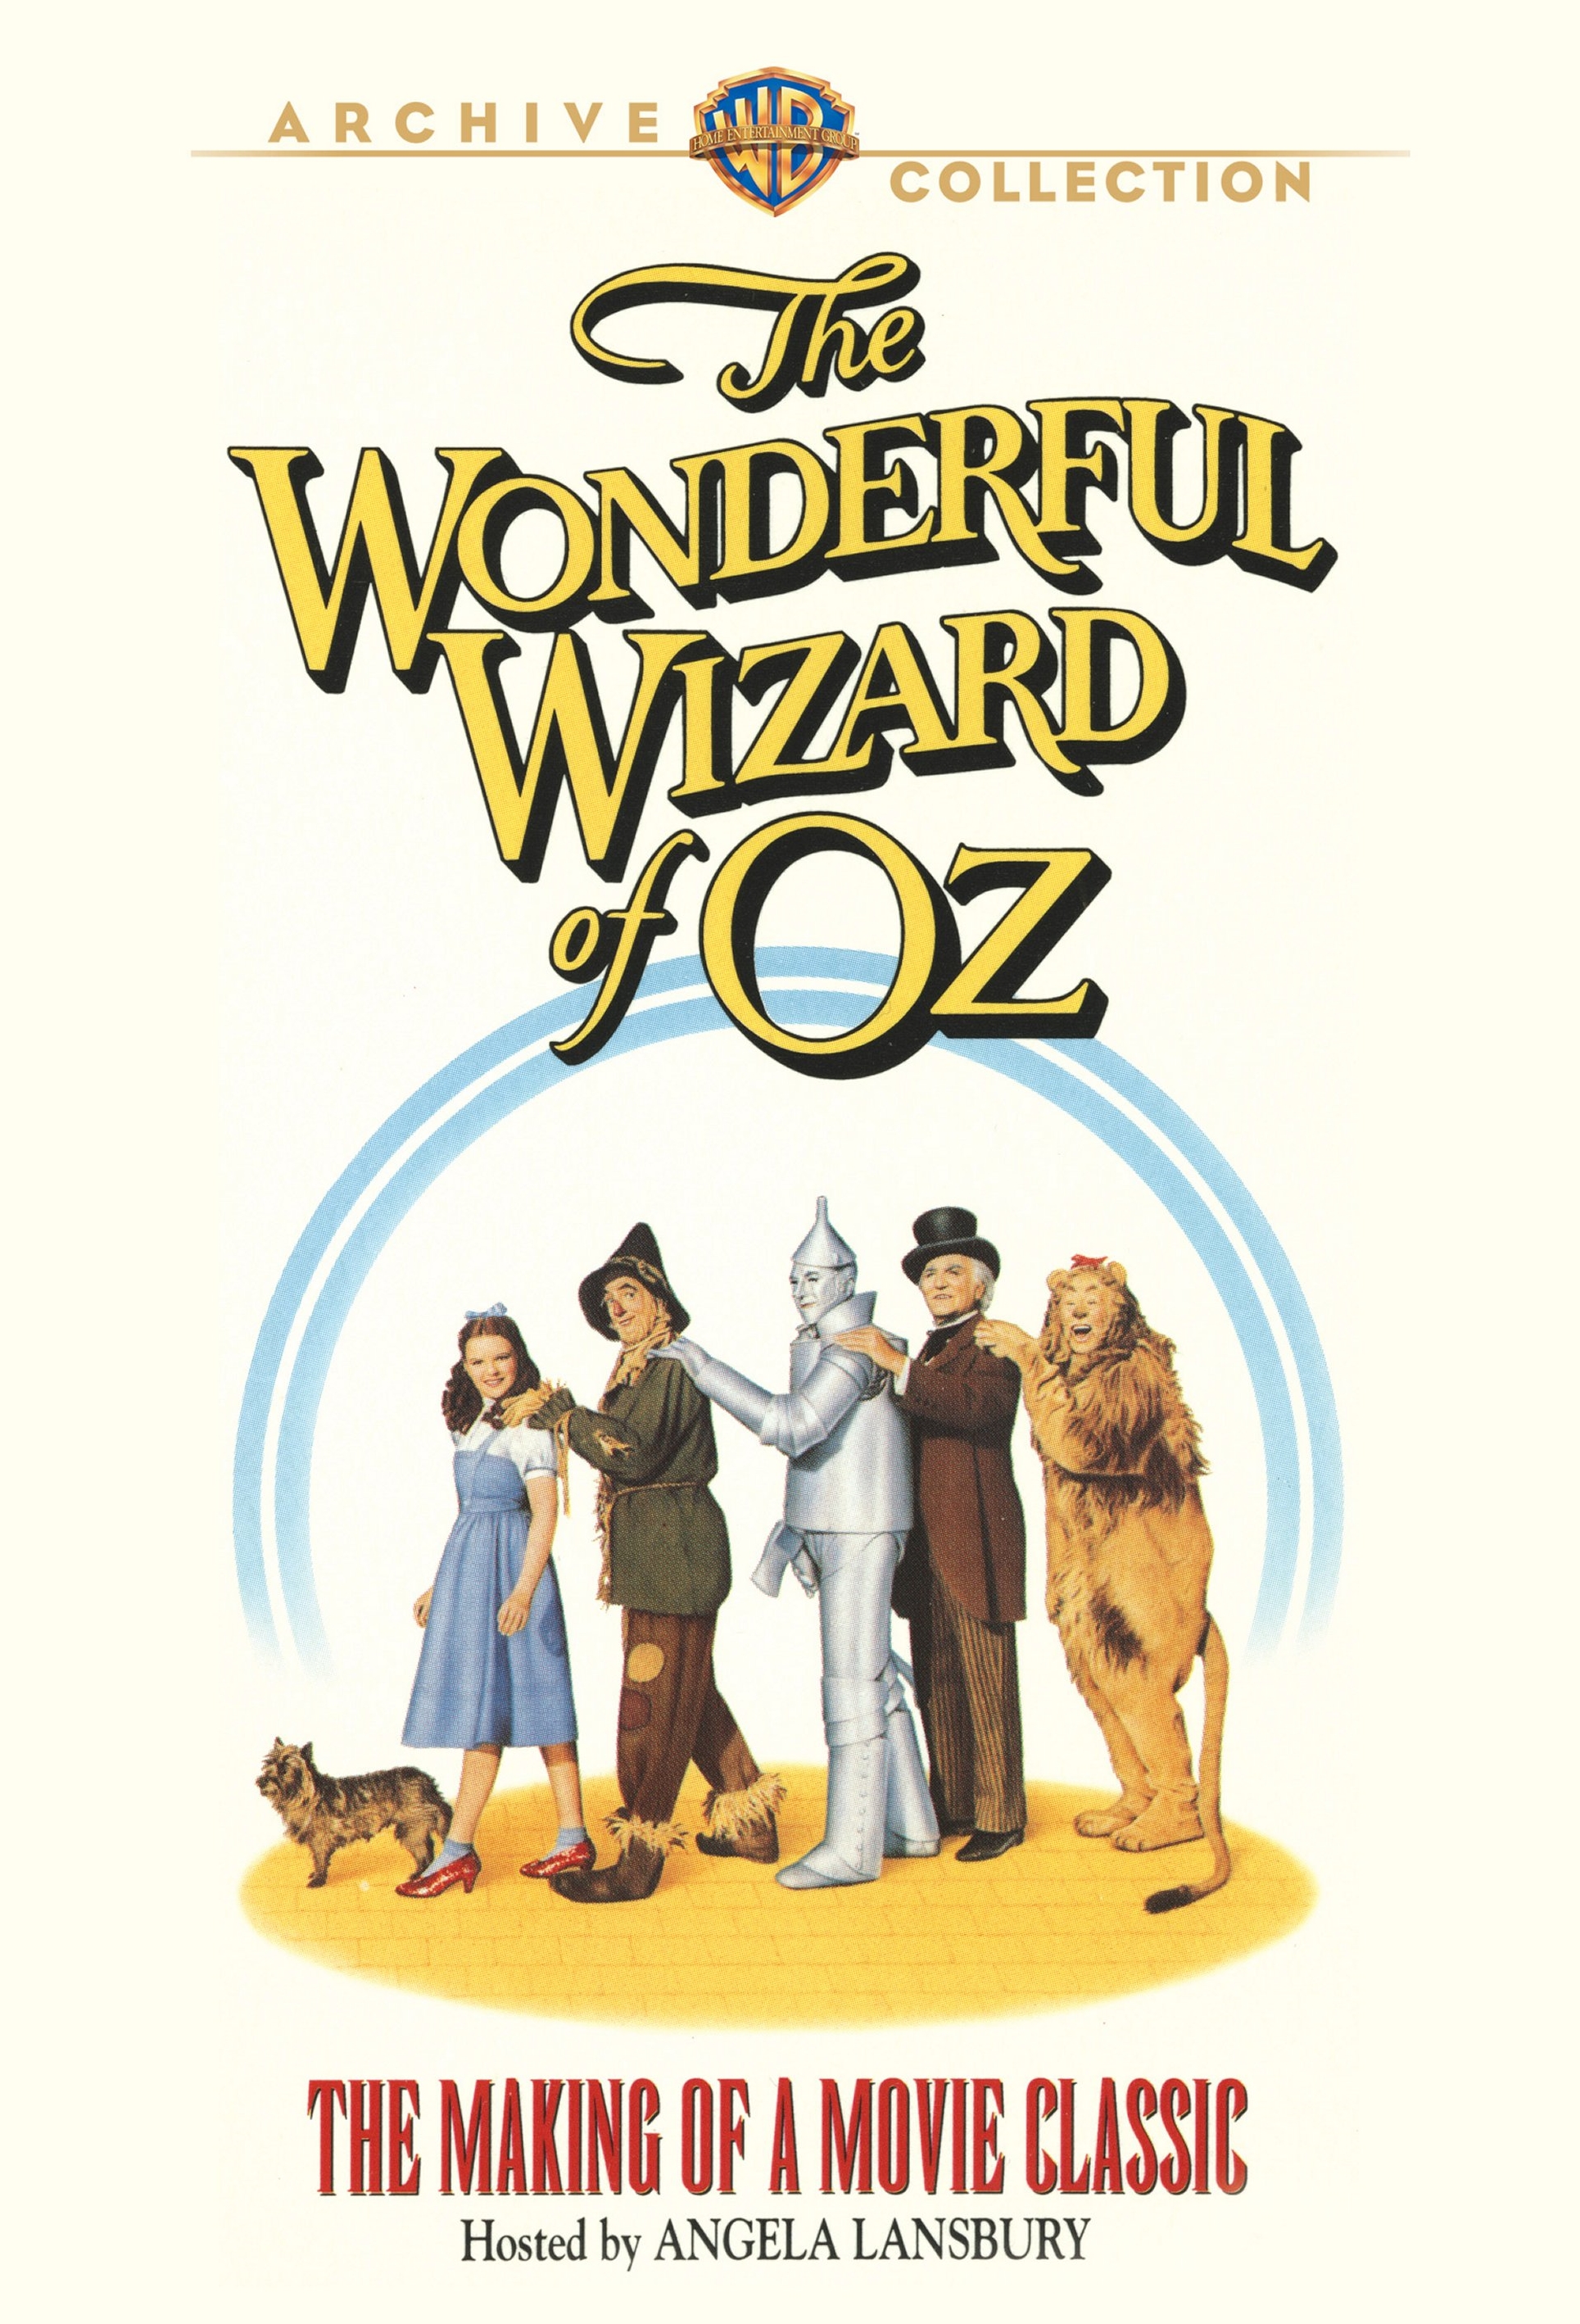 The Wizard of Oz [75th Anniversary] [DVD] [1939] - Best Buy